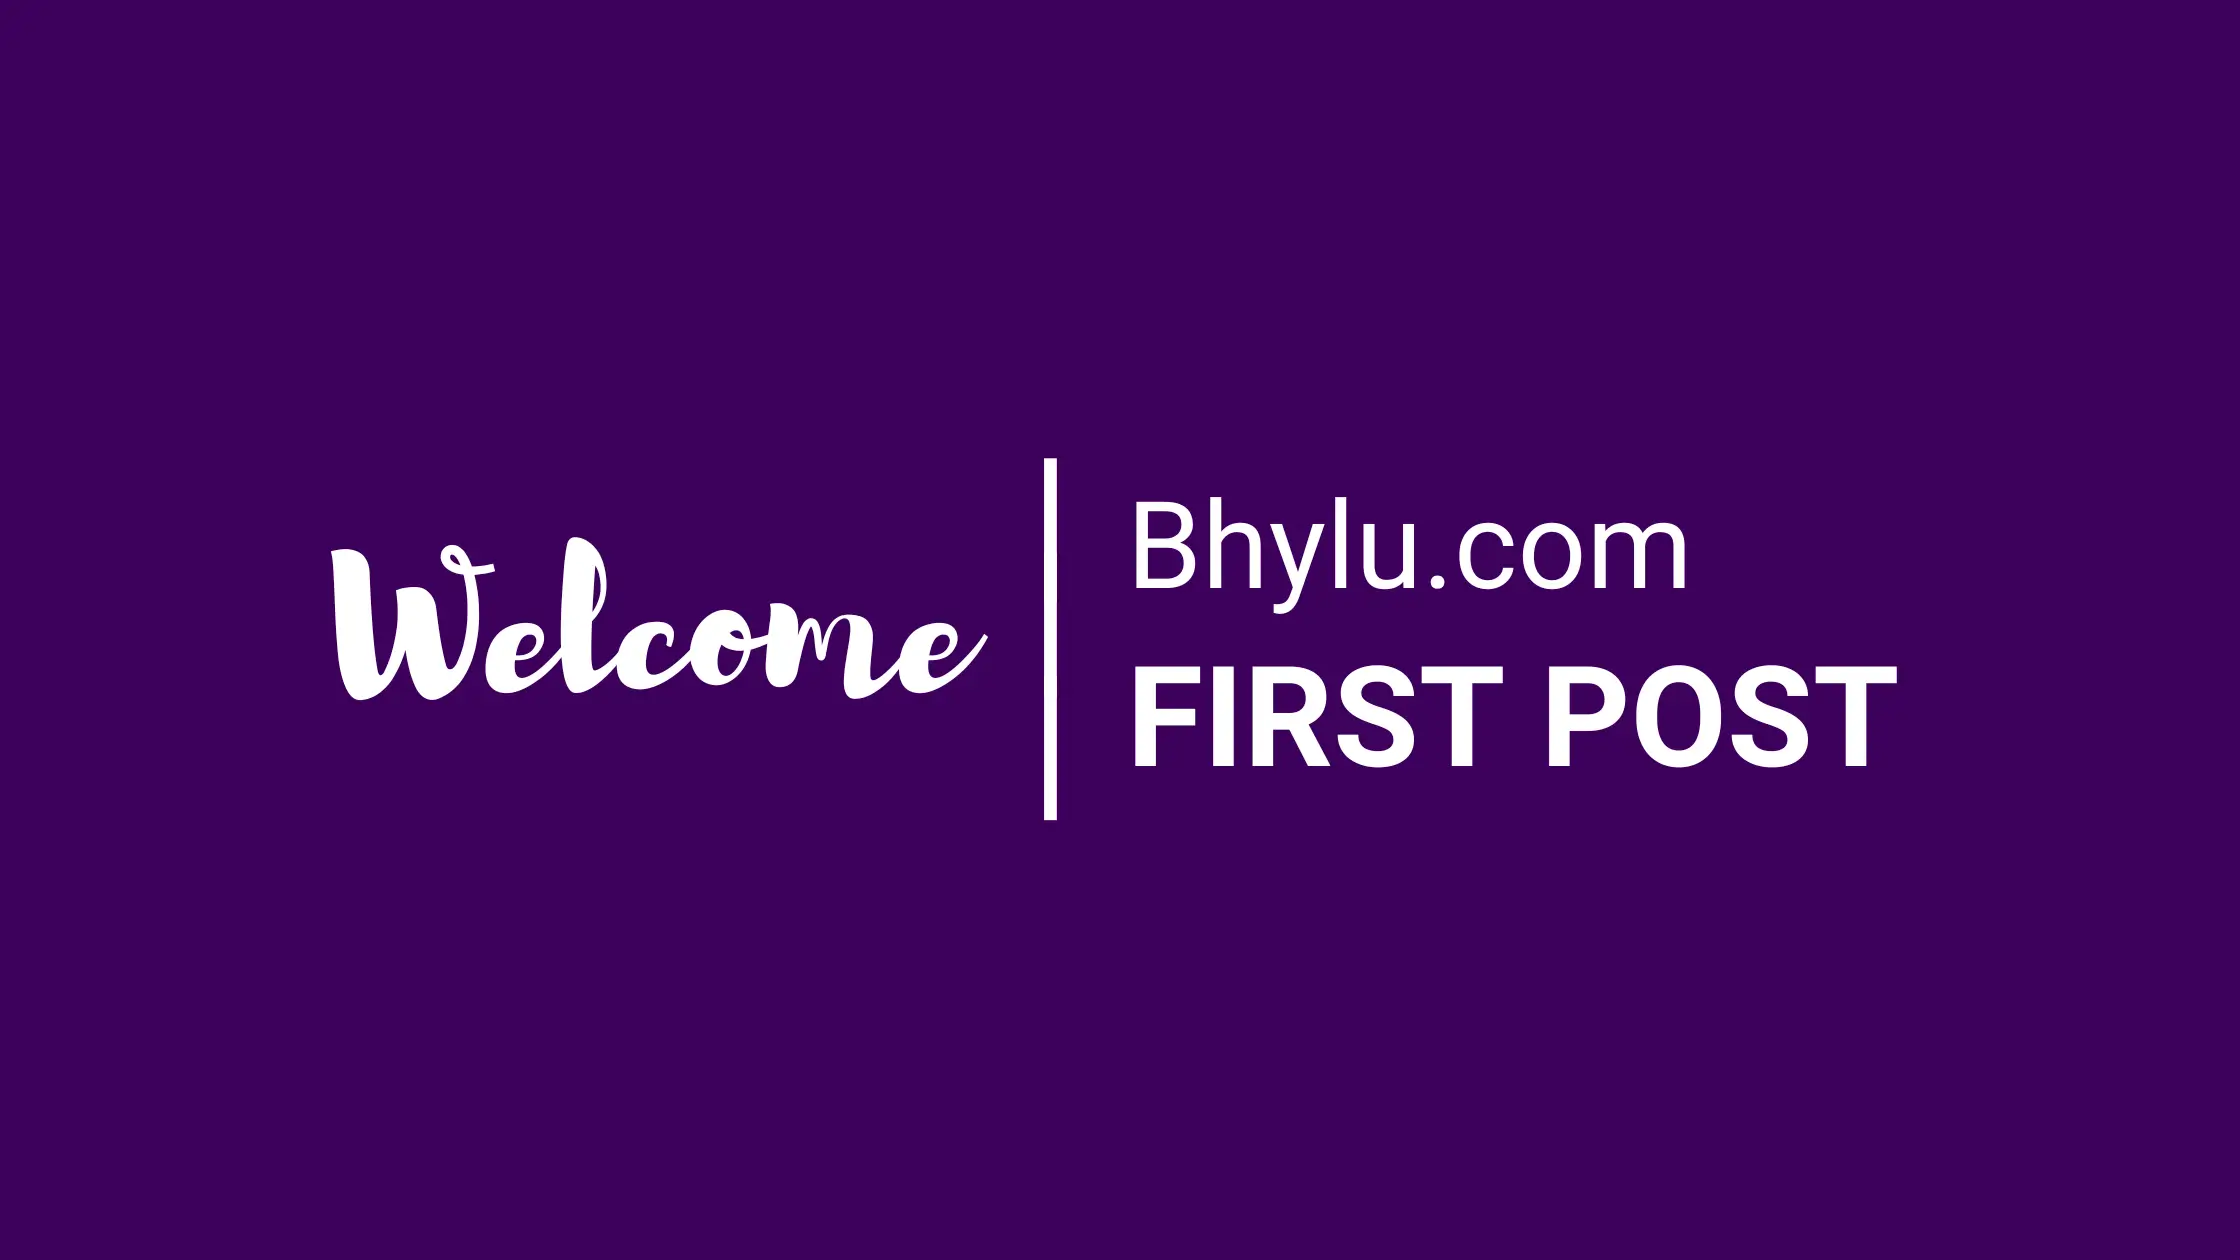 You are currently viewing Bhylu.com First Post: Welcome :)